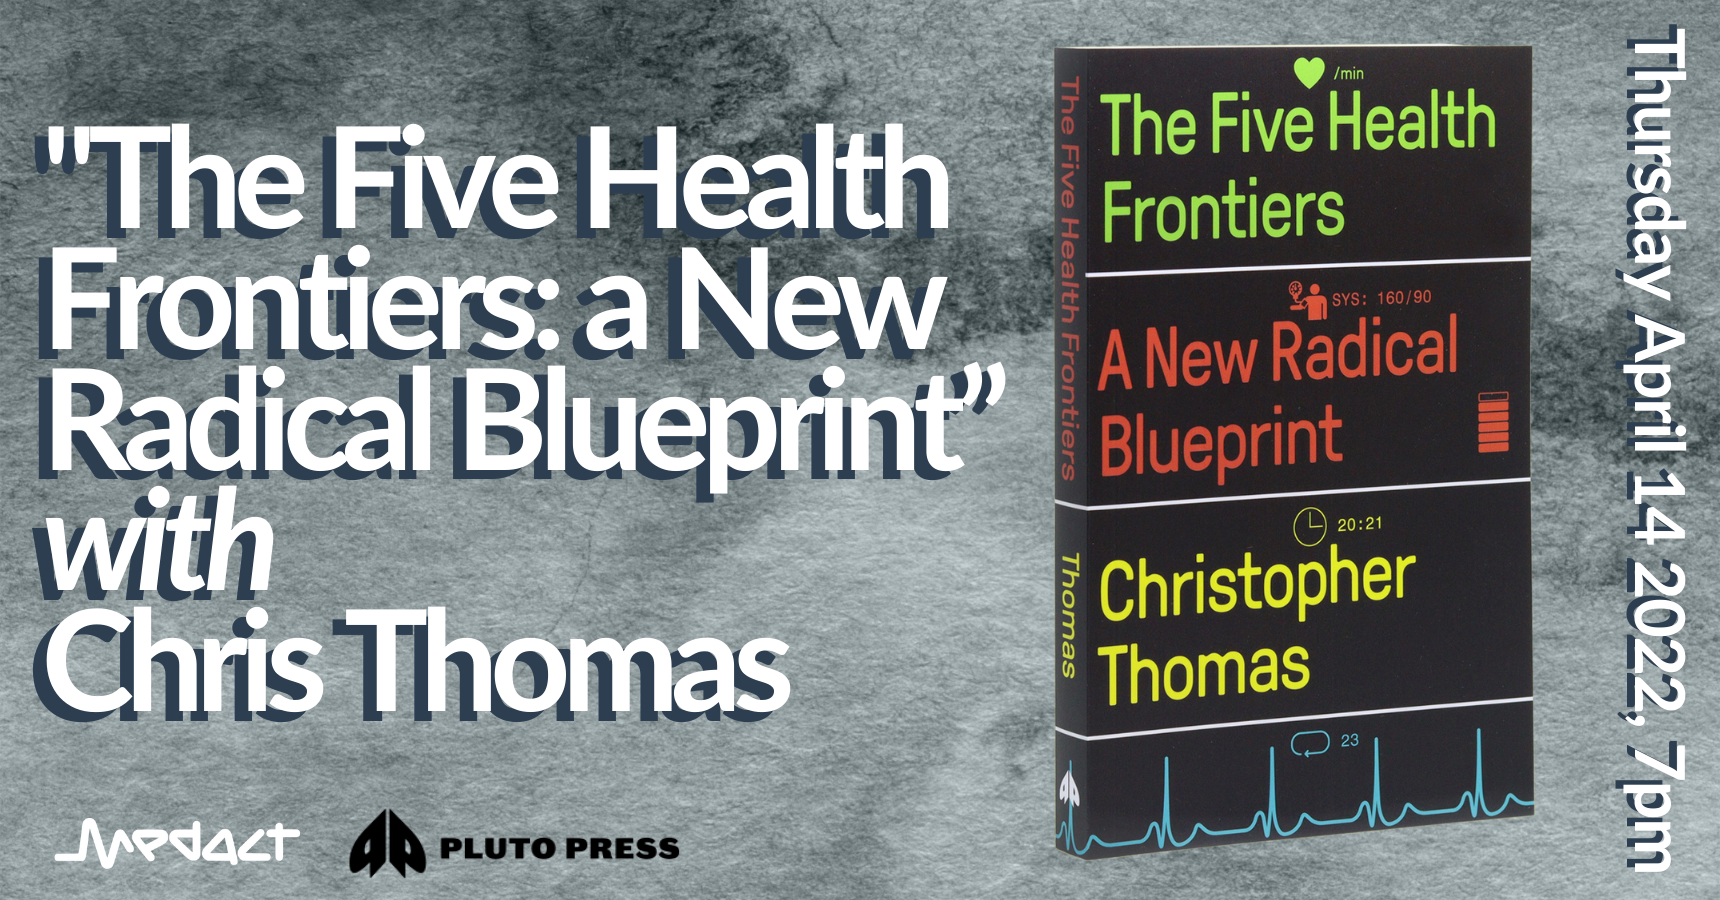 ‘The Five Health Frontiers: a New Radical Blueprint’ with Chris Thomas